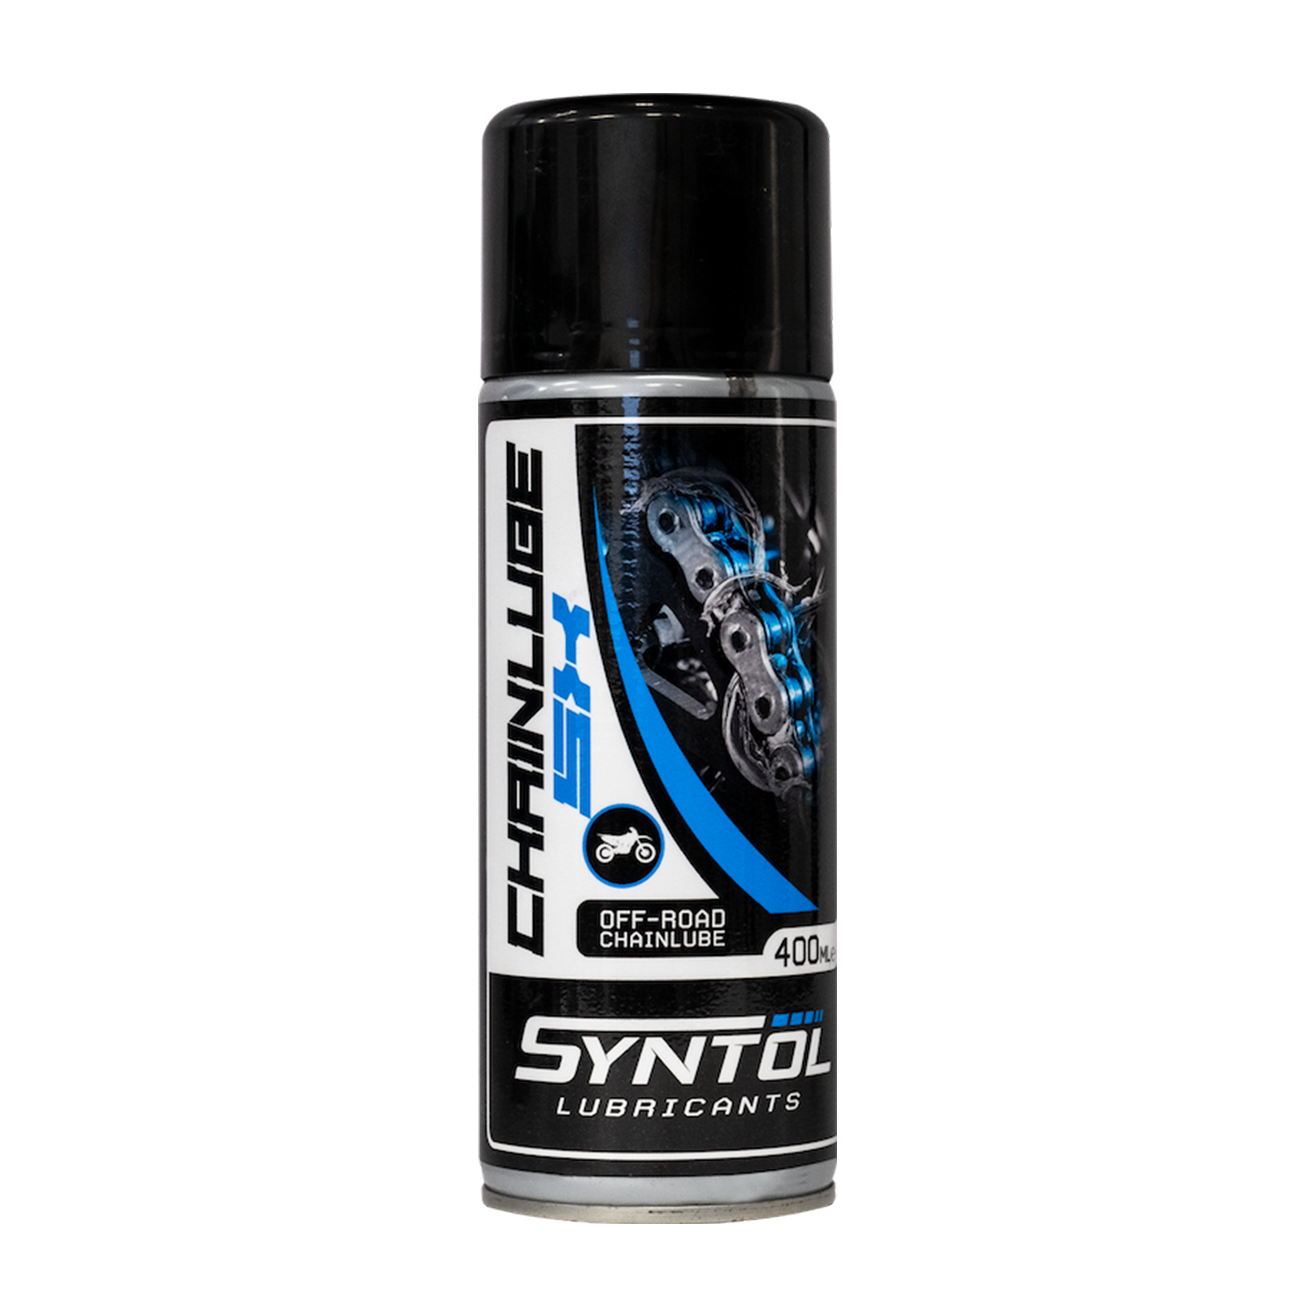 Syntol Chainlube-SX Aerosol - 400ML-F0092-400-Oils and Lubricants-Pyramid Motorcycle Accessories